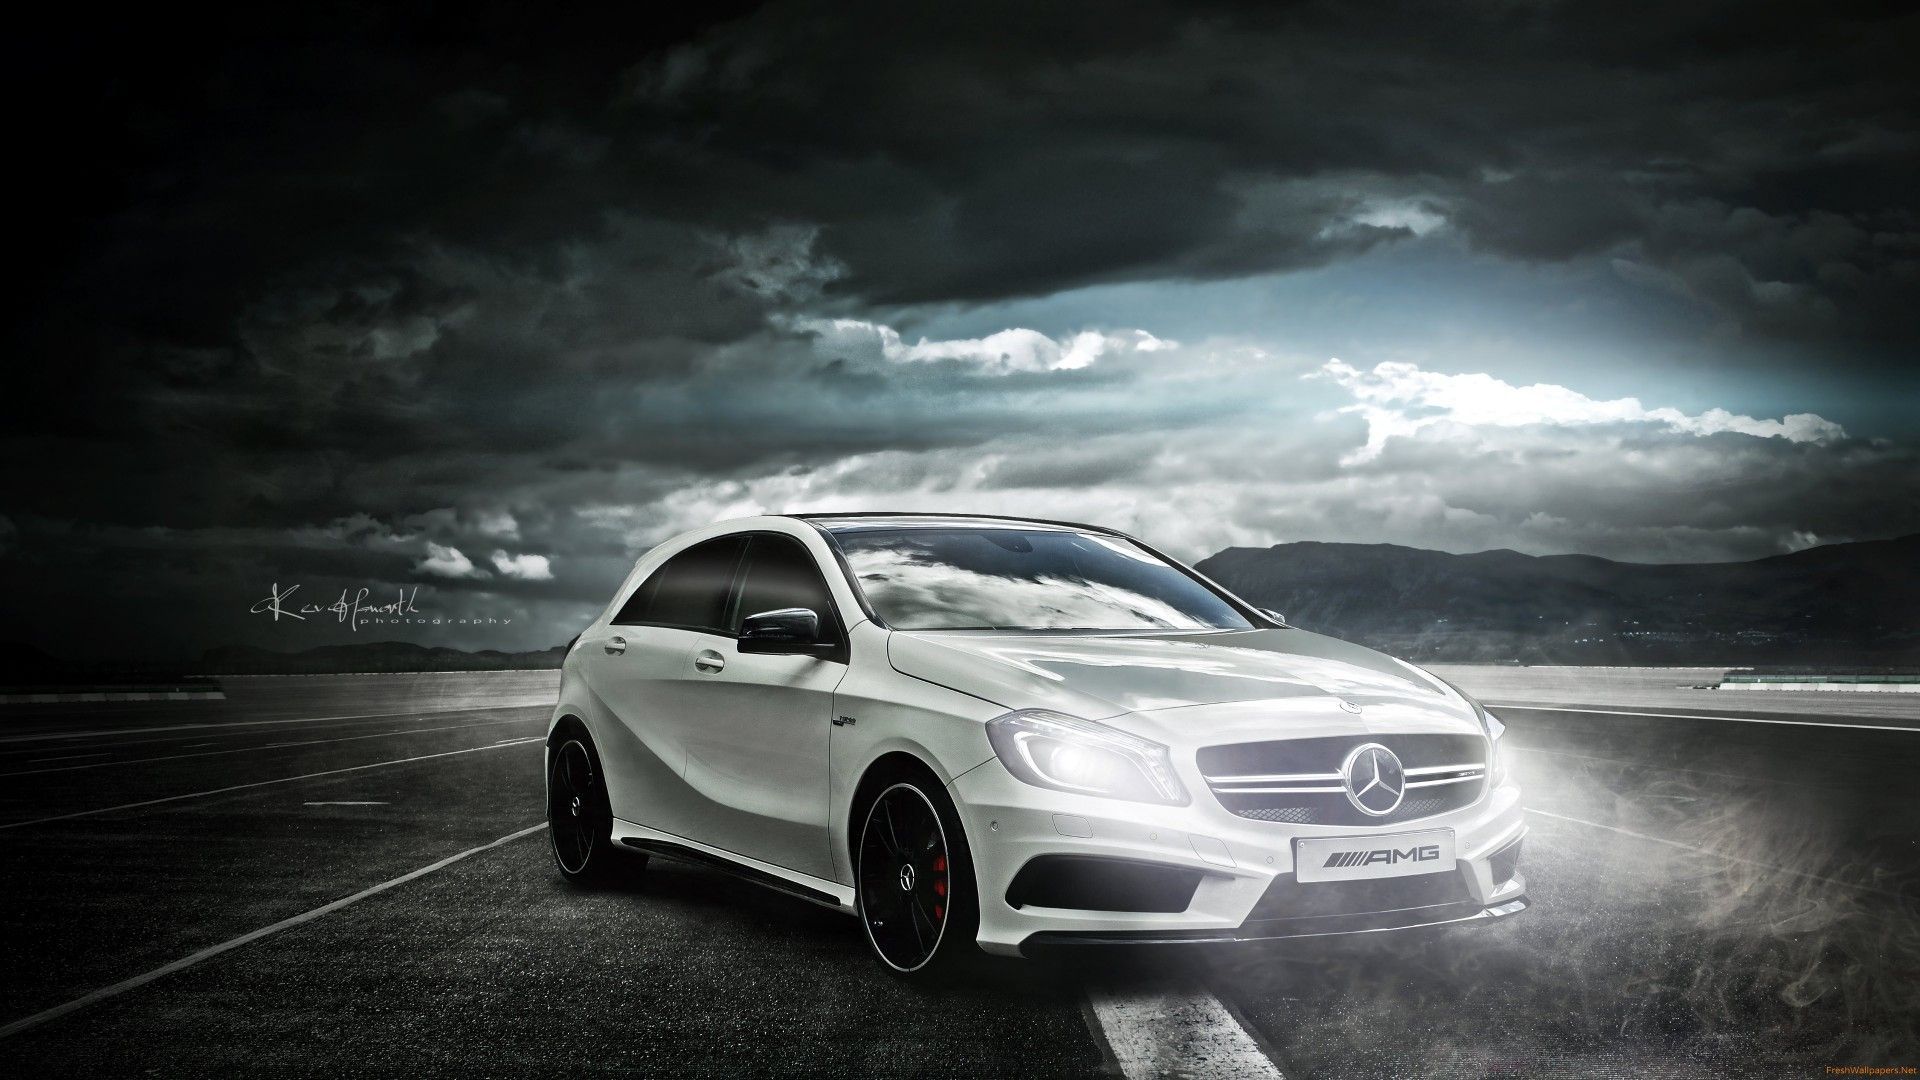 Mercedes-Benz A45 AMG wallpapers | Freshwallpapers